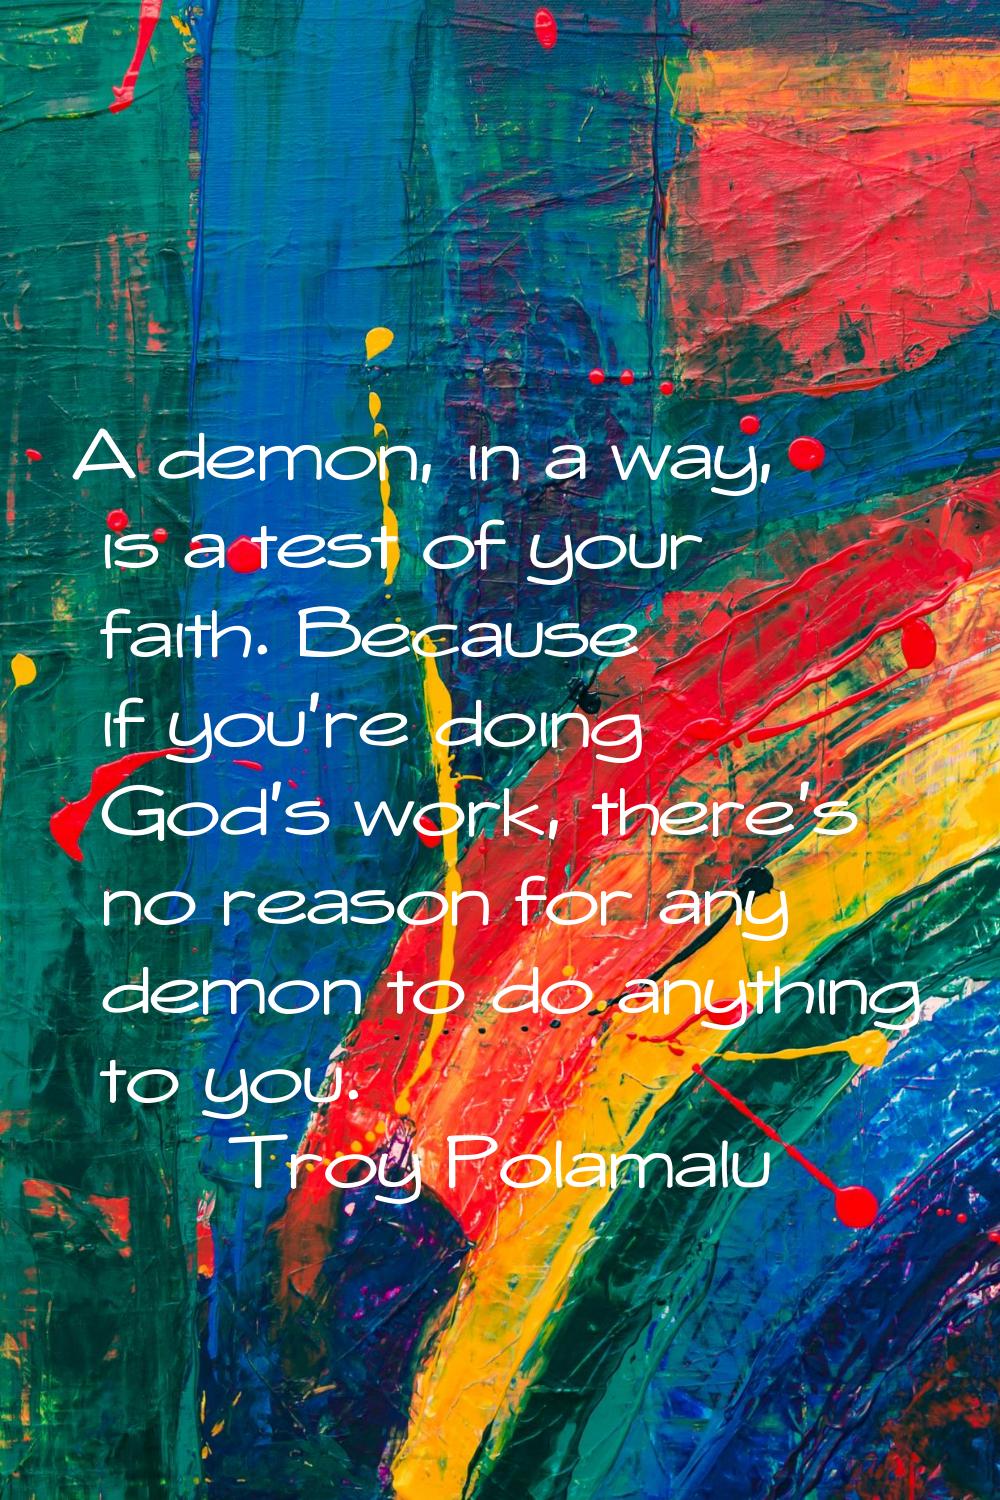 A demon, in a way, is a test of your faith. Because if you're doing God's work, there's no reason f